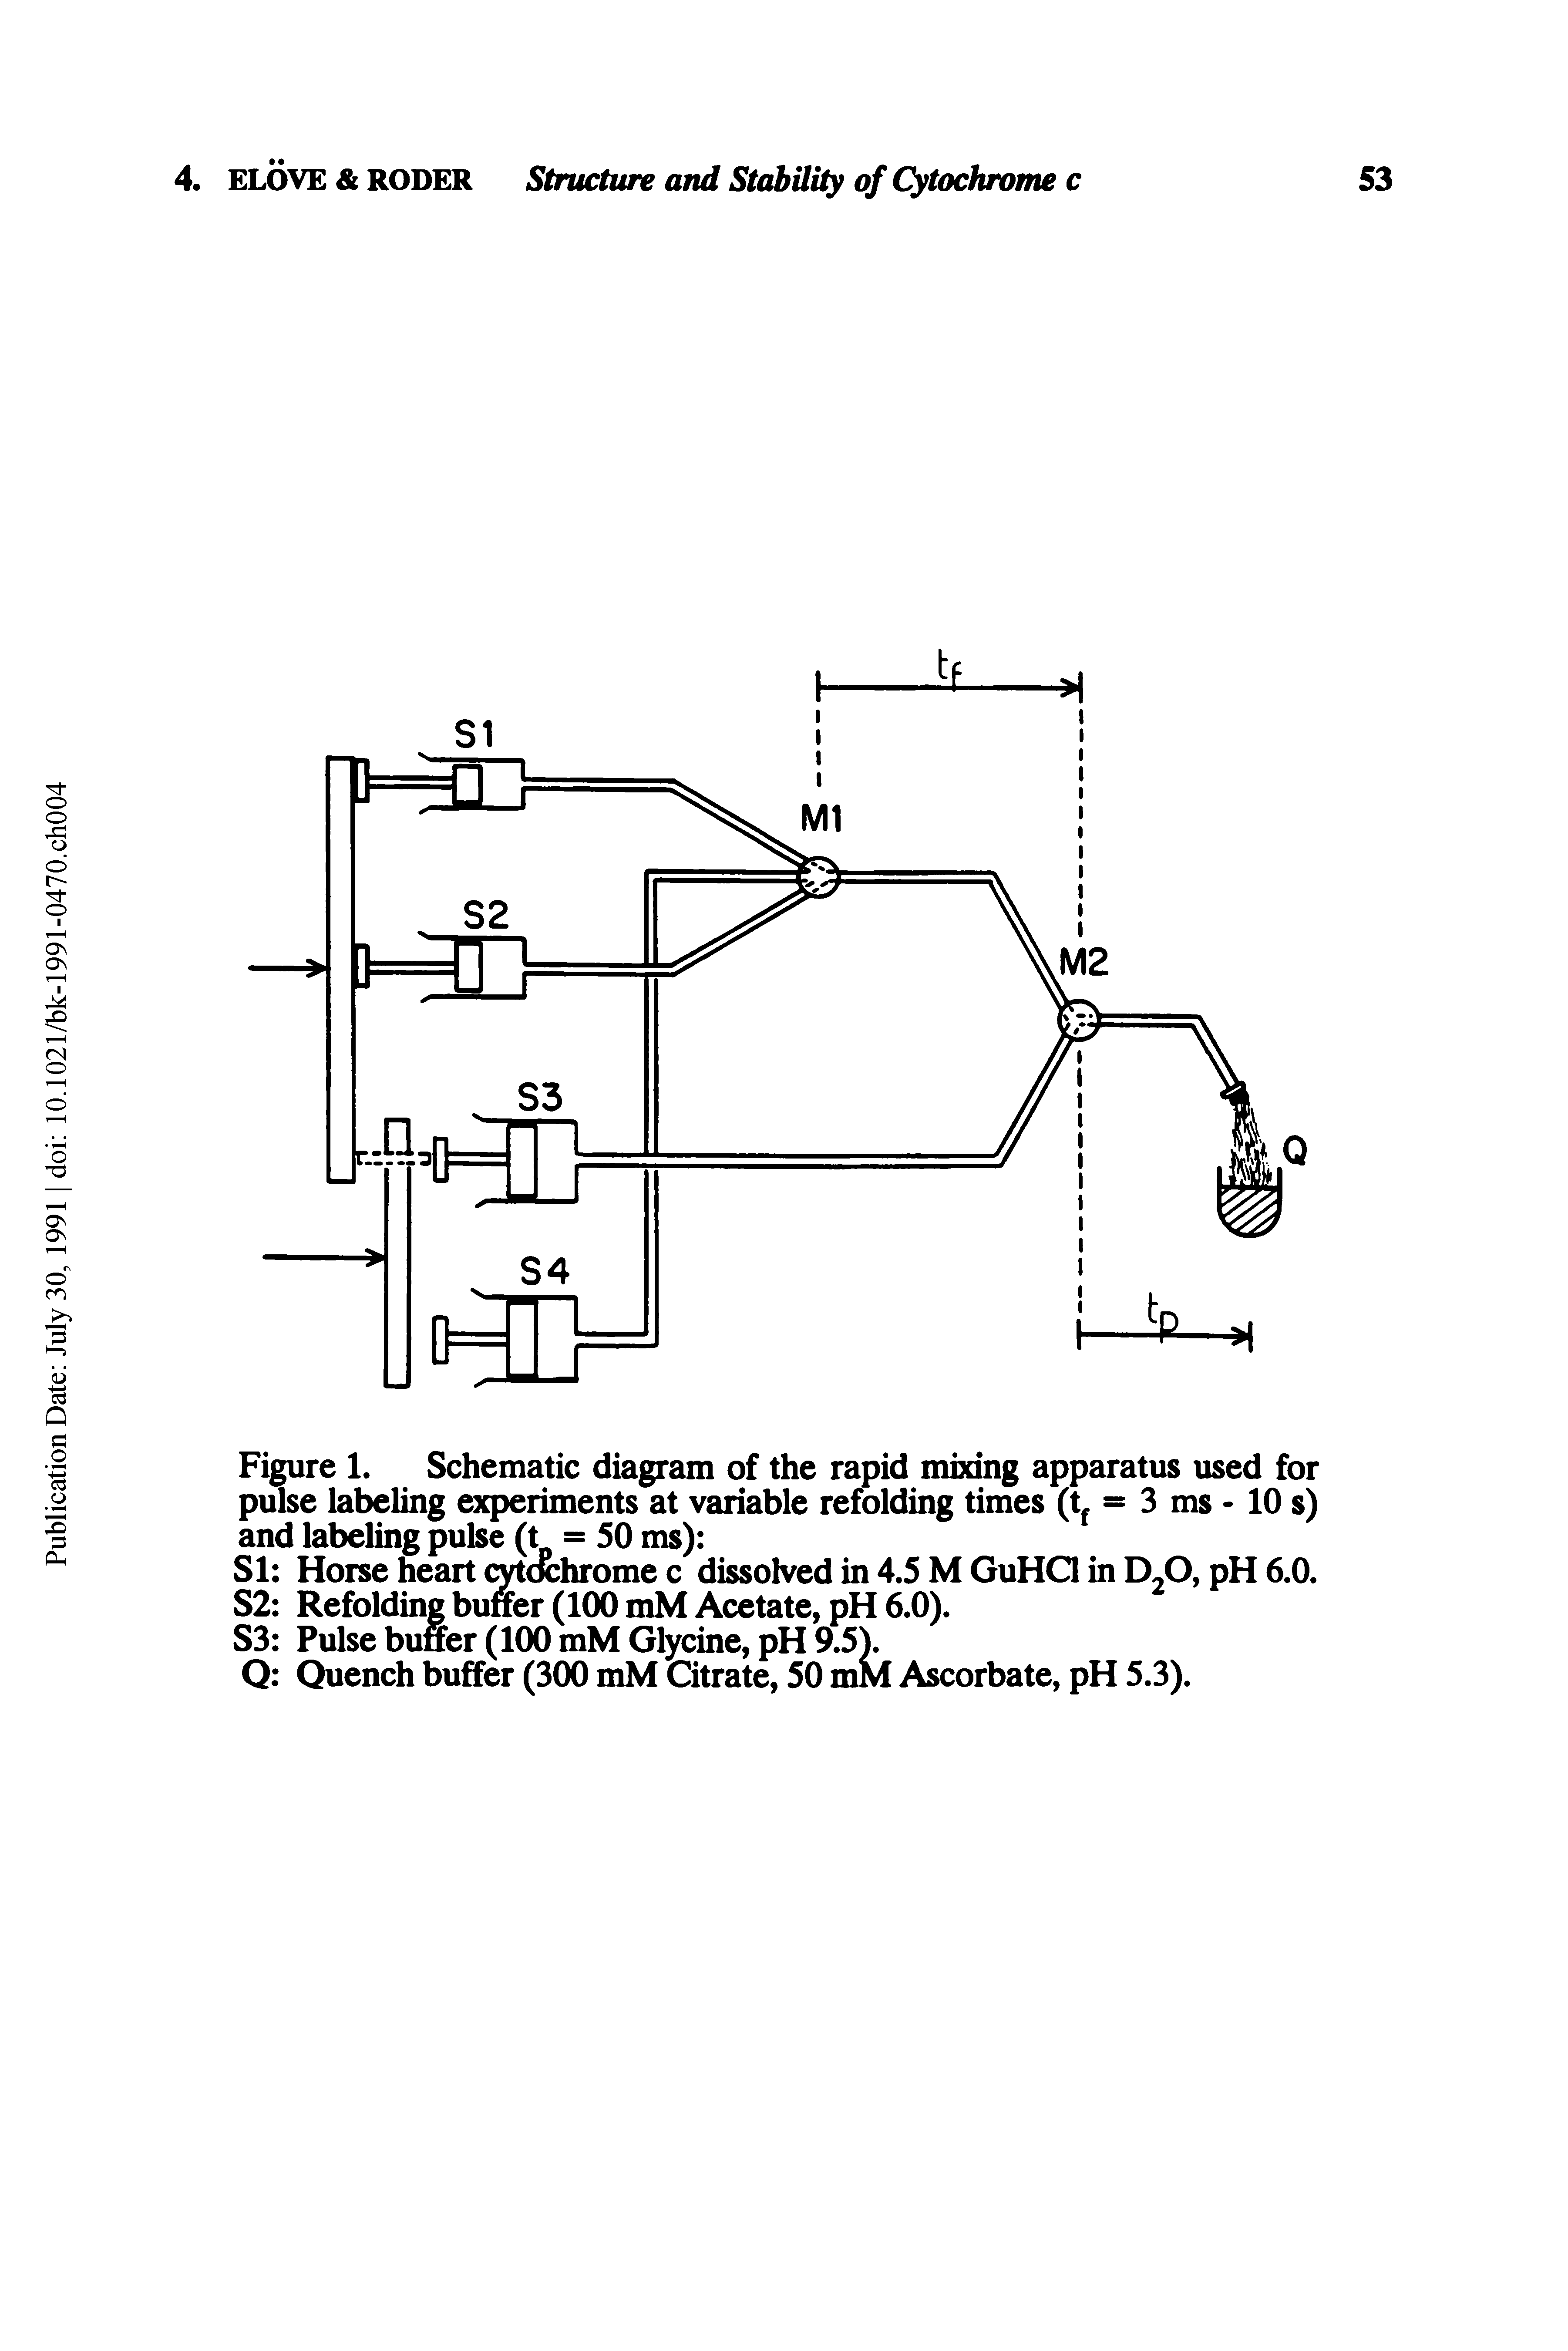 Figure 1. Schematic diagram of the rapid mixing apparatus used for pulse labeling experiments at variable refolding times (t = 3 ms - 10 s) and labeling pulse (t = 50 ms) ...